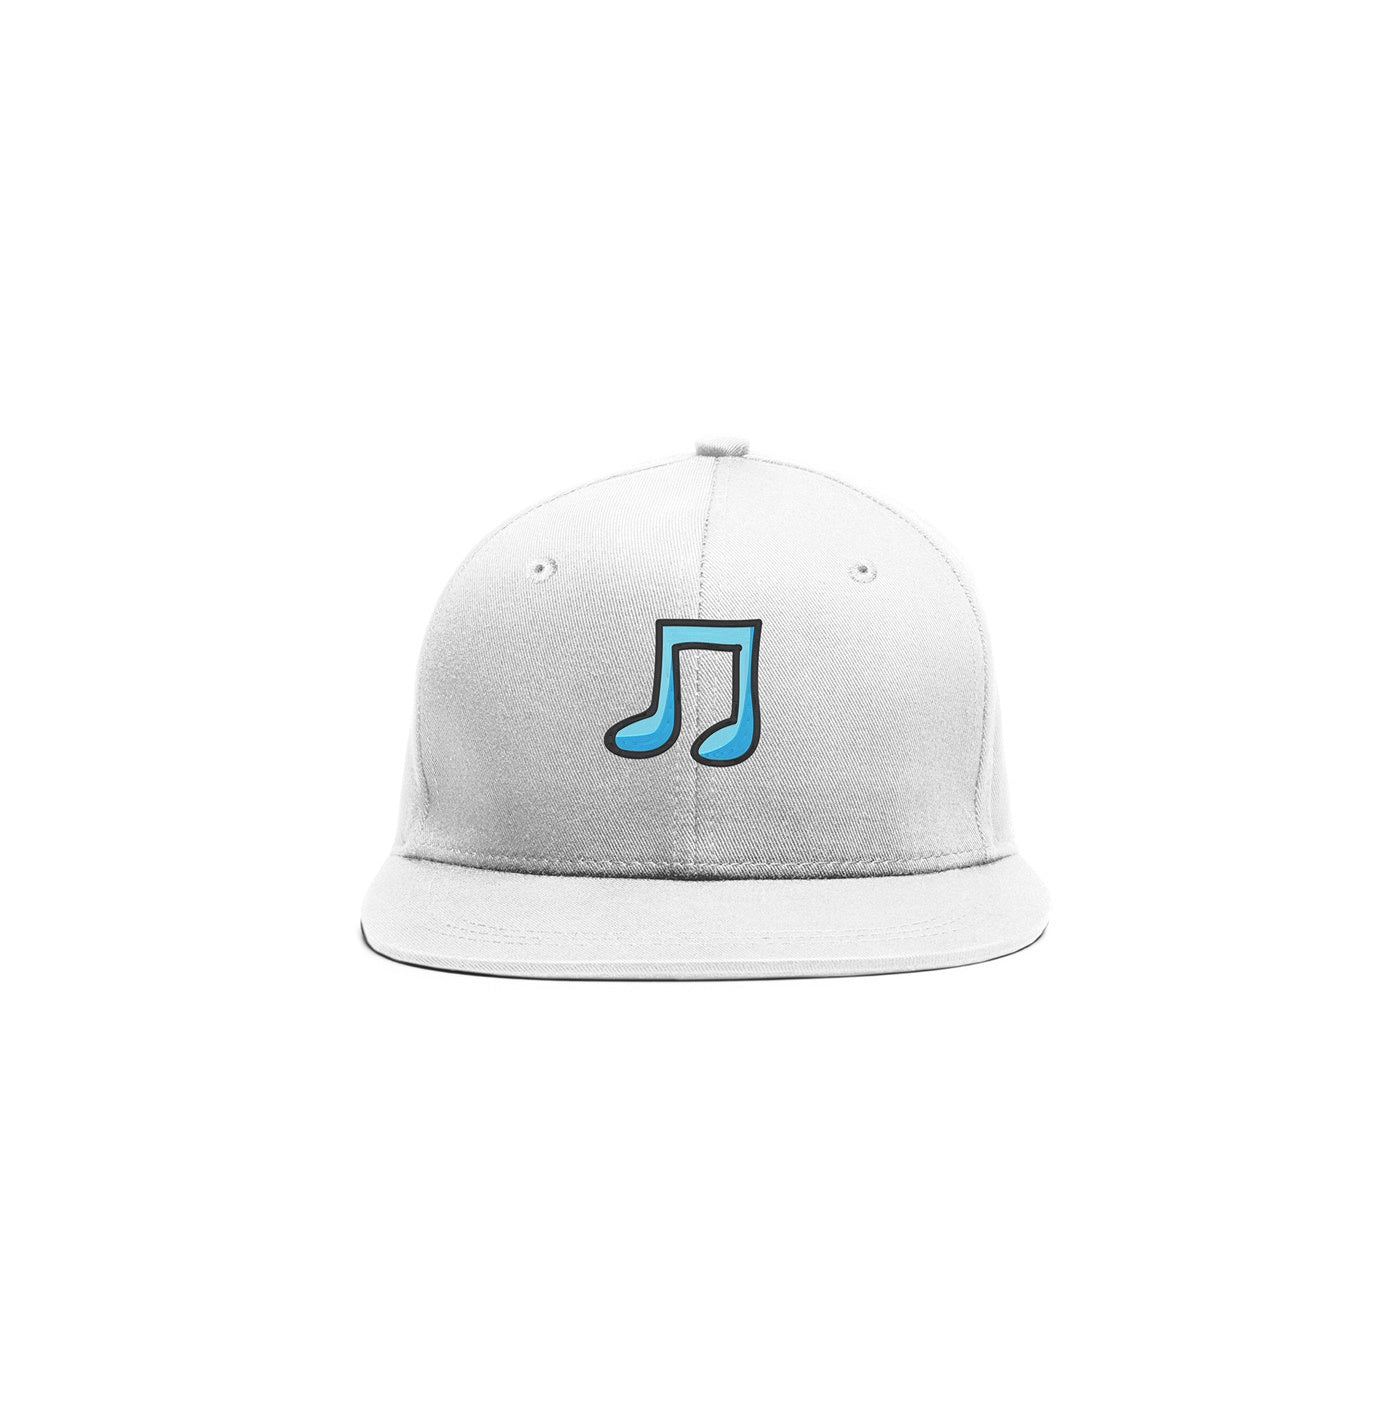 Embroidered Musical Note Cap